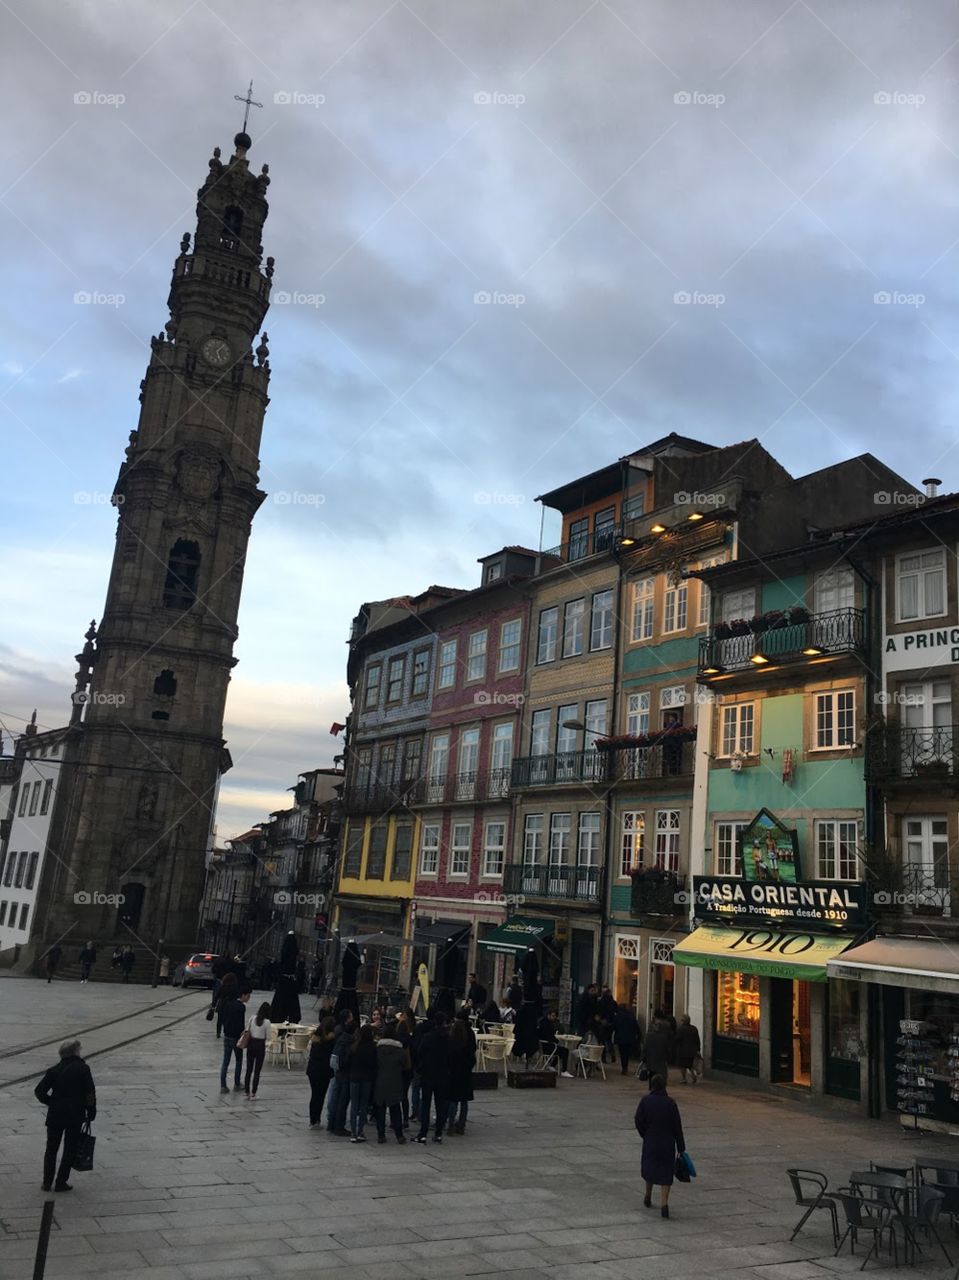 As the sunsets in Porto, the last ray of sunshine hits the facade of the colorful buildings and provides and glowing effect. 